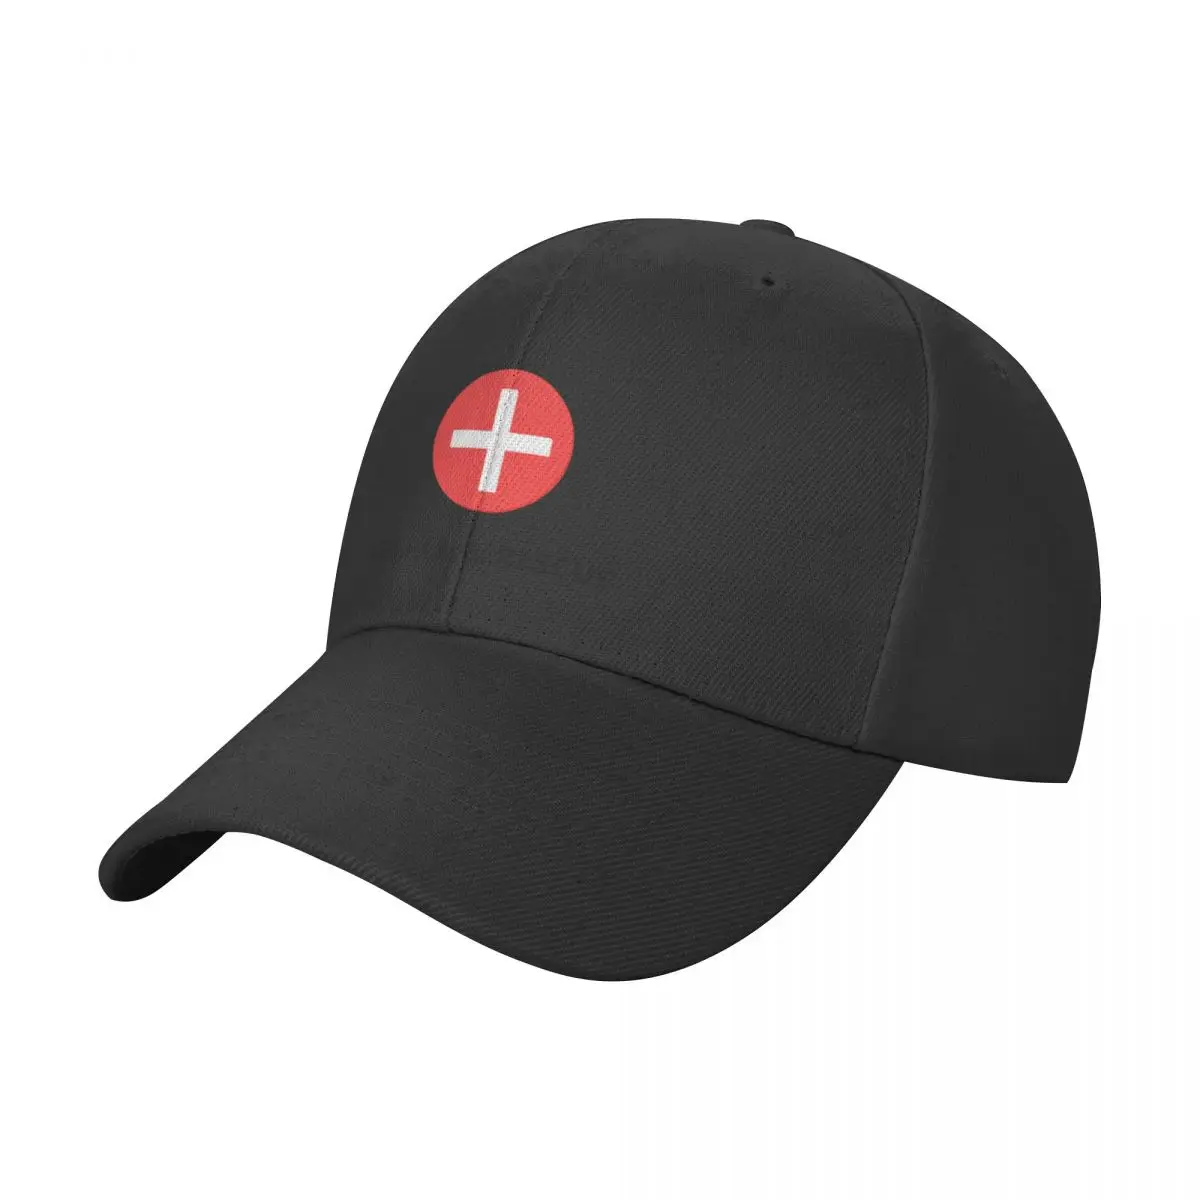 

Search and Rescue First Aid Cross Baseball Cap fishing hat Hip Hop Fishing cap Female Men's